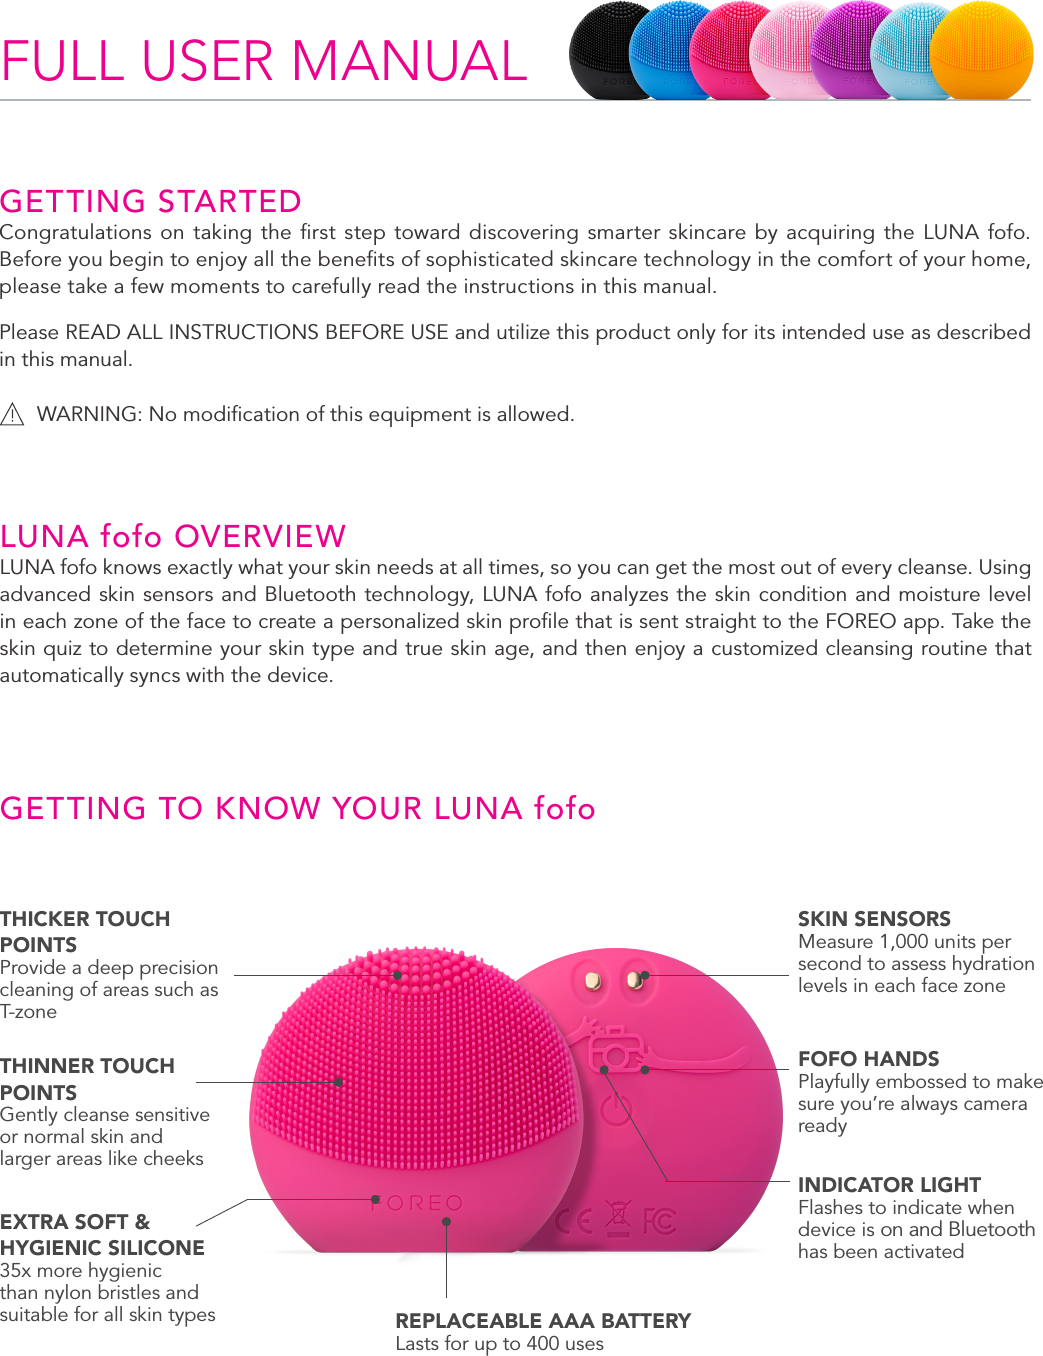 2LUNA fofo OVERVIEWLUNA fofo knows exactly what your skin needs at all times, so you can get the most out of every cleanse. Using advanced skin sensors and Bluetooth technology, LUNA fofo analyzes the skin condition and moisture level in each zone of the face to create a personalized skin proﬁle that is sent straight to the FOREO app. Take the skin quiz to determine your skin type and true skin age, and then enjoy a customized cleansing routine that automatically syncs with the device.GETTING TO KNOW YOUR LUNA fofoFULL USER MANUALGETTING STARTEDCongratulations on taking the ﬁrst step toward discovering smarter skincare by acquiring the LUNA fofo.  Before you begin to enjoy all the beneﬁts of sophisticated skincare technology in the comfort of your home, please take a few moments to carefully read the instructions in this manual.Please READ ALL INSTRUCTIONS BEFORE USE and utilize this product only for its intended use as described in this manual.WARNING: No modiﬁcation of this equipment is allowed.THICKER TOUCH POINTSProvide a deep precision cleaning of areas such as T-zoneTHINNER TOUCH POINTSGently cleanse sensitive or normal skin and larger areas like cheeksEXTRA SOFT &amp; HYGIENIC SILICONE35x more hygienic than nylon bristles and suitable for all skin types REPLACEABLE AAA BATTERYLasts for up to 400 usesSKIN SENSORS Measure 1,000 units per second to assess hydration levels in each face zoneFOFO HANDSPlayfully embossed to make sure you’re always camera readyINDICATOR LIGHTFlashes to indicate when device is on and Bluetooth has been activated 